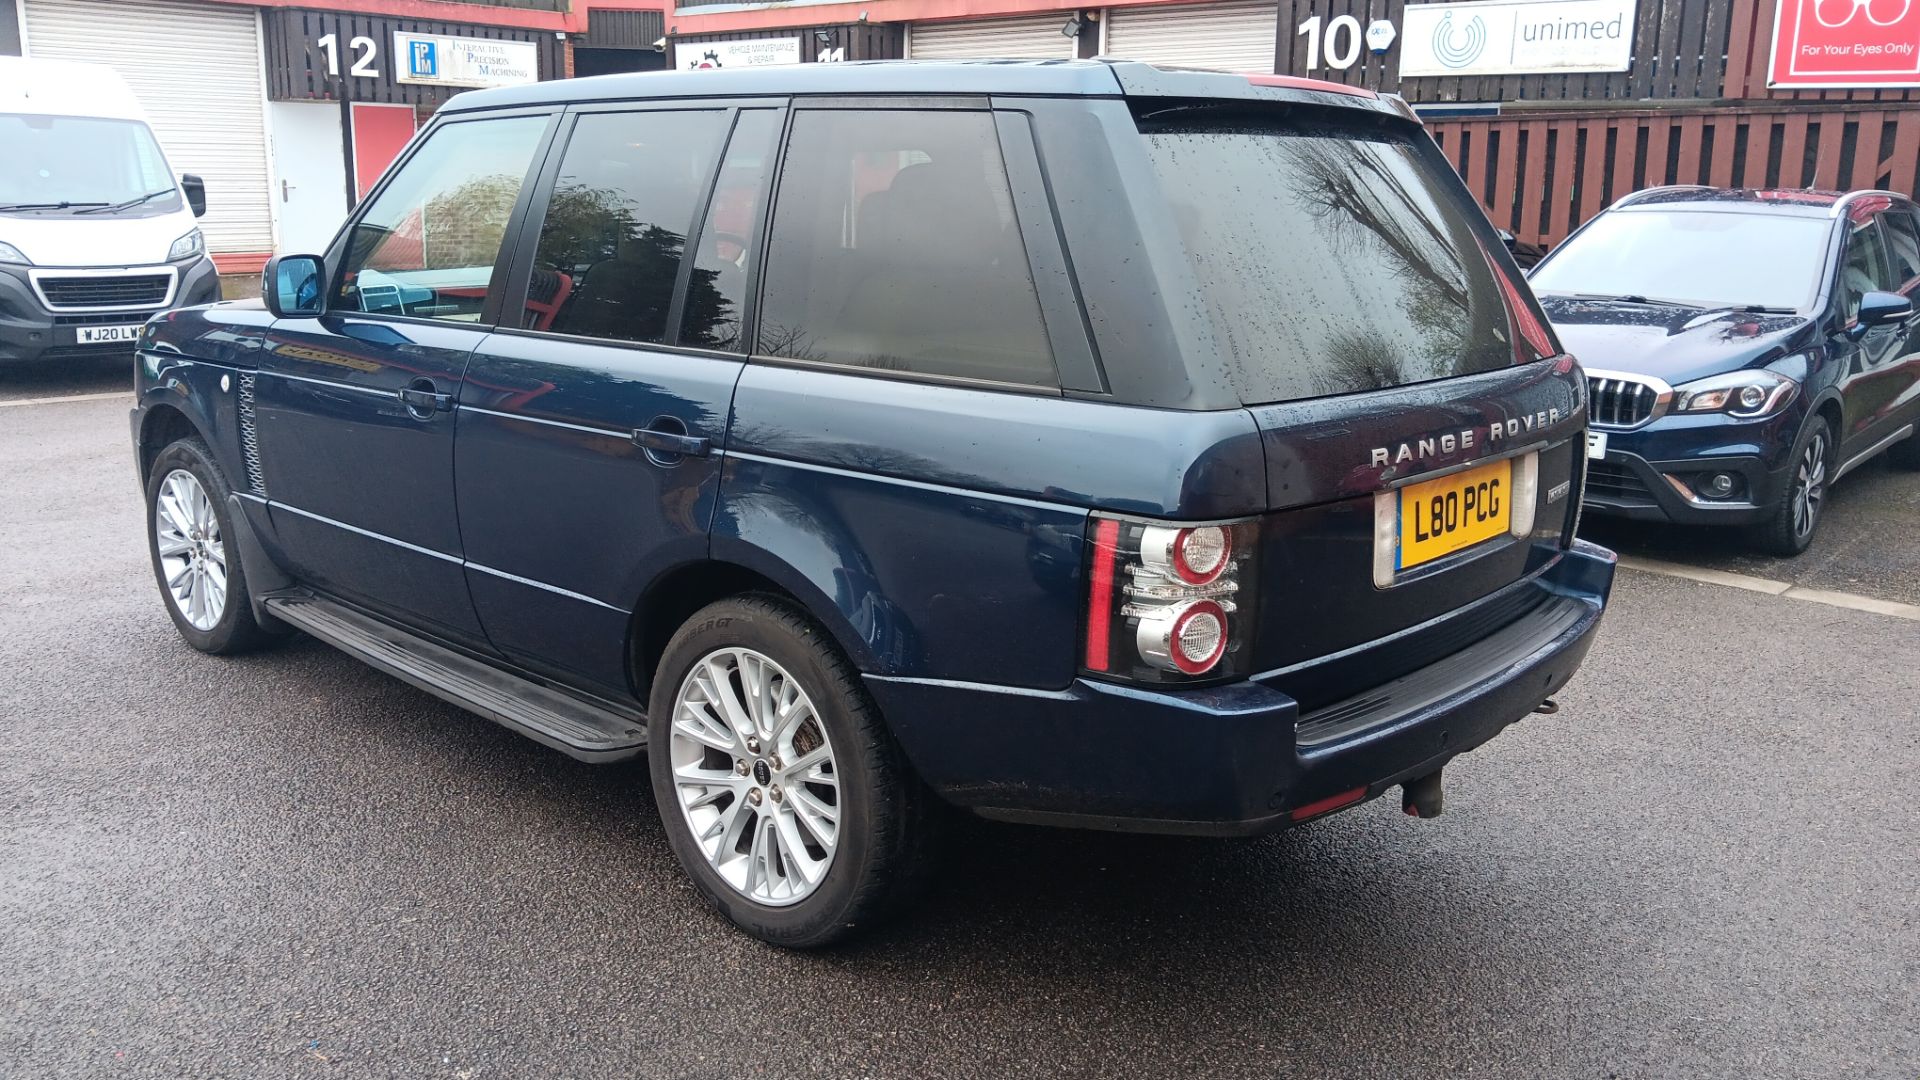 Land Rover Range Rover Special Editions 4.4 TDV8 Westminster 4dr 8 speed Auto, Registration L80 PCG - Image 5 of 28